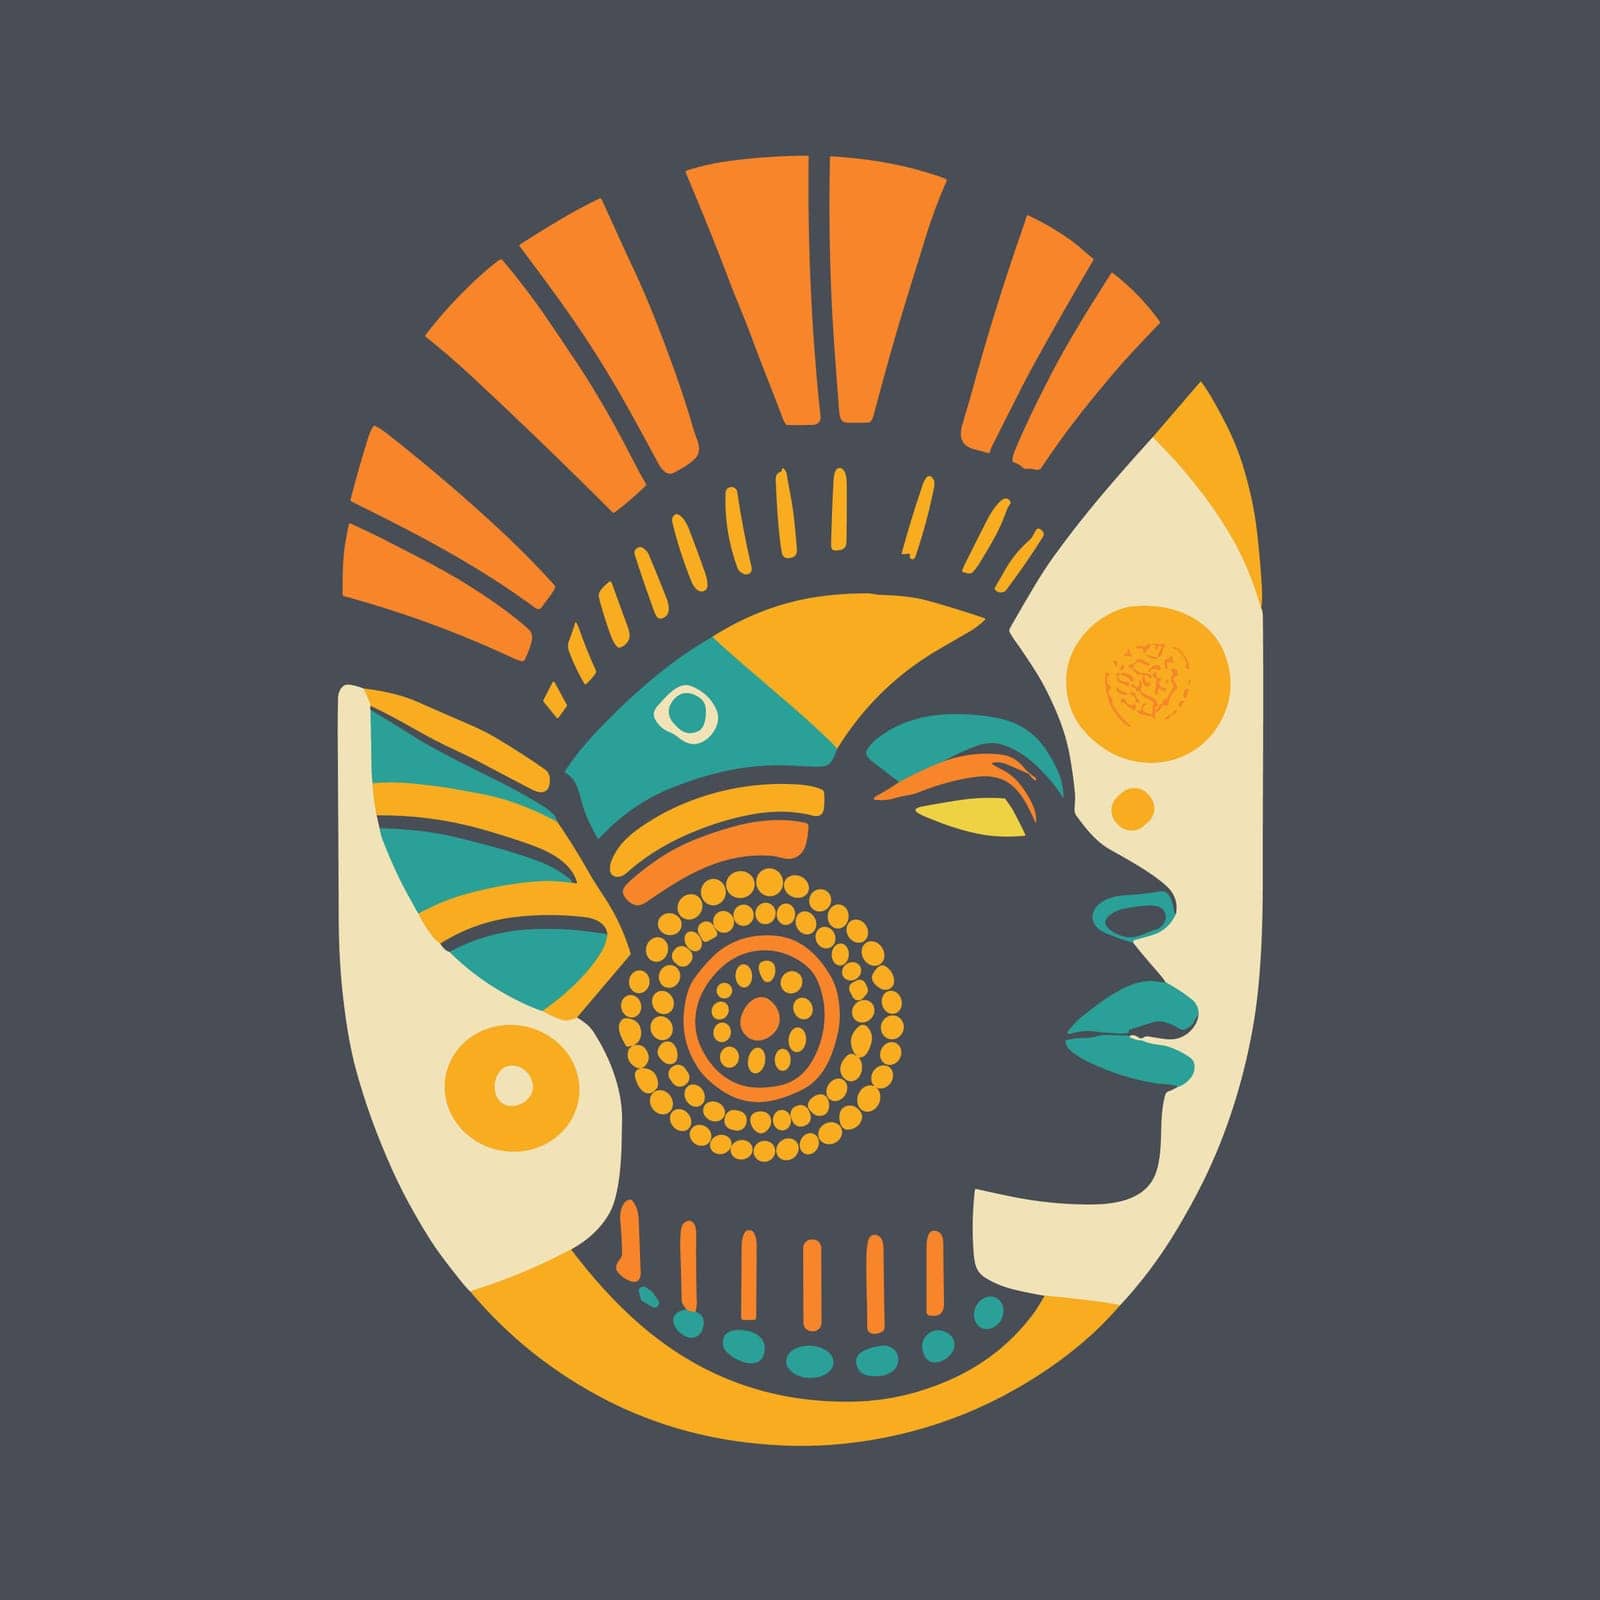 Minimalist Tshirt or Logo Design Stylized Head with a Traditional African Hairstyle and Jewelry by LanaLeta